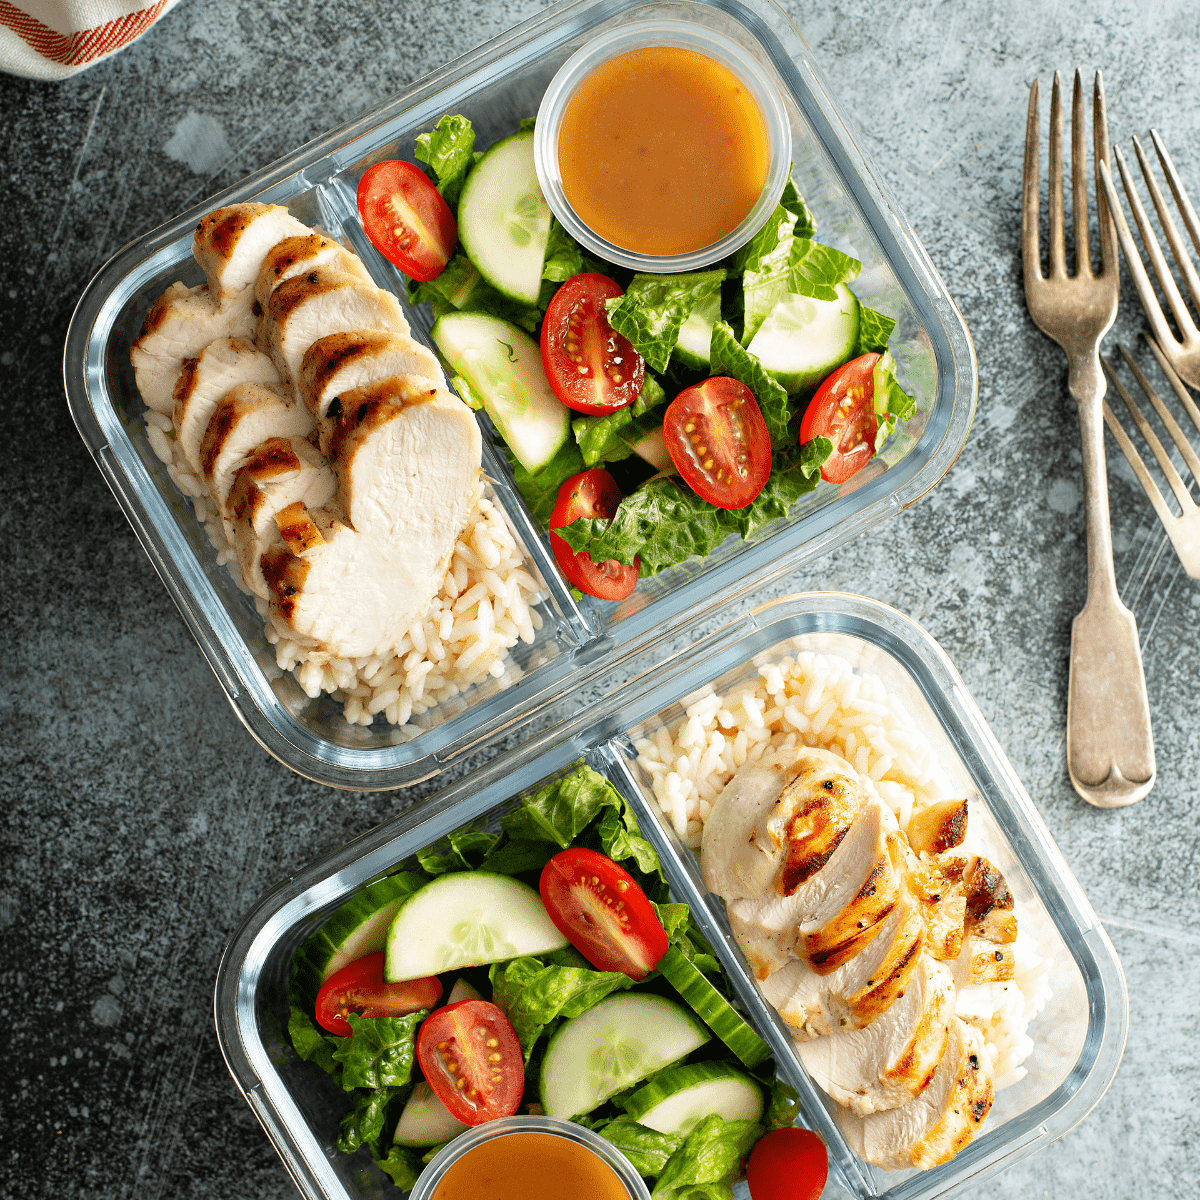 Meal Prep For Weight Loss - Organize Yourself Skinny